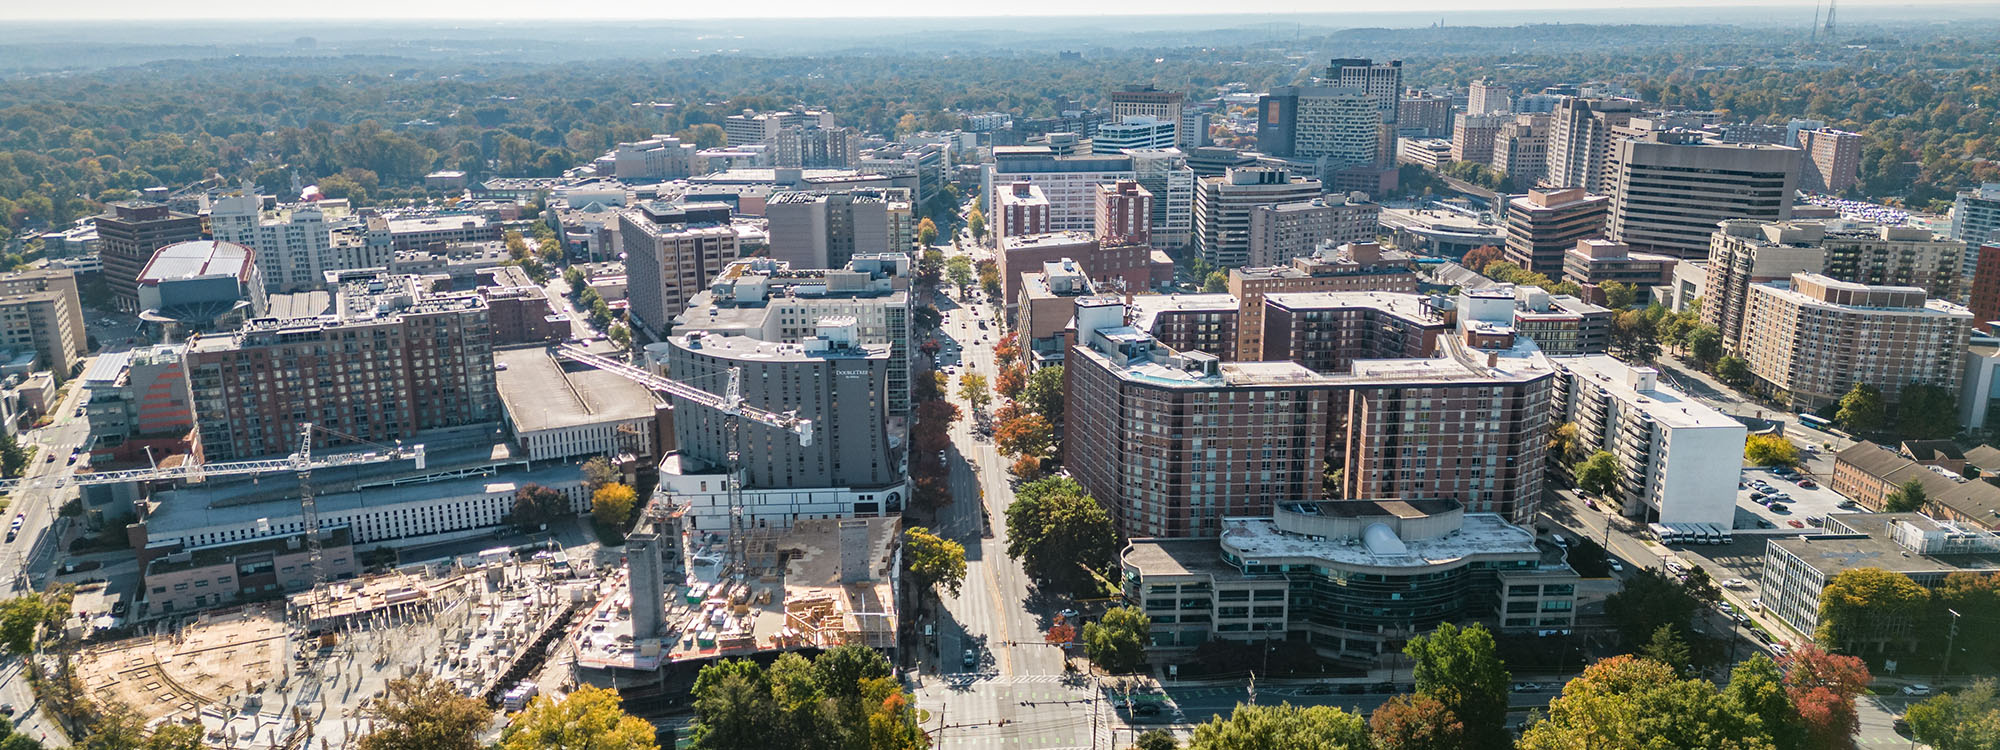 aerial view of georgia avenue looking south at downtown Silver Spring